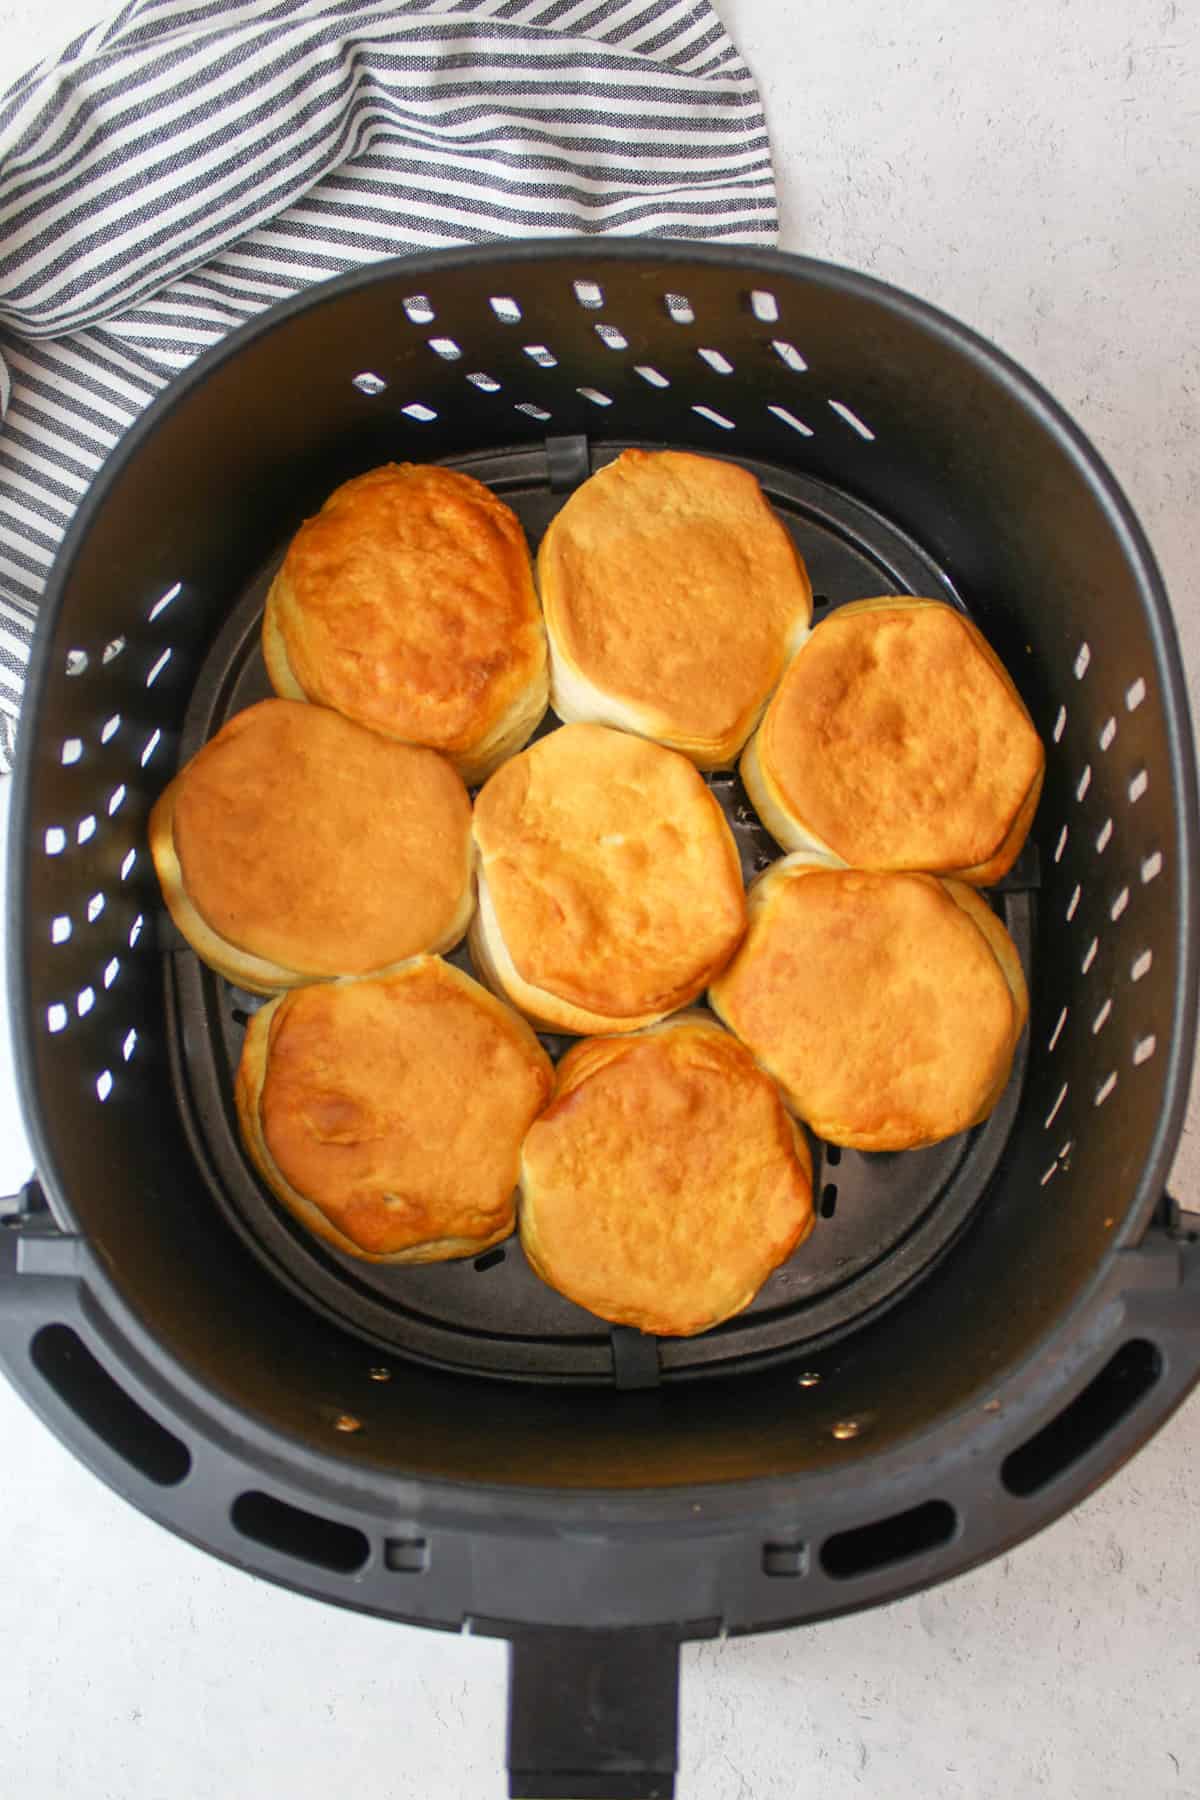 How Long To Cook Biscuits In Air Fryer